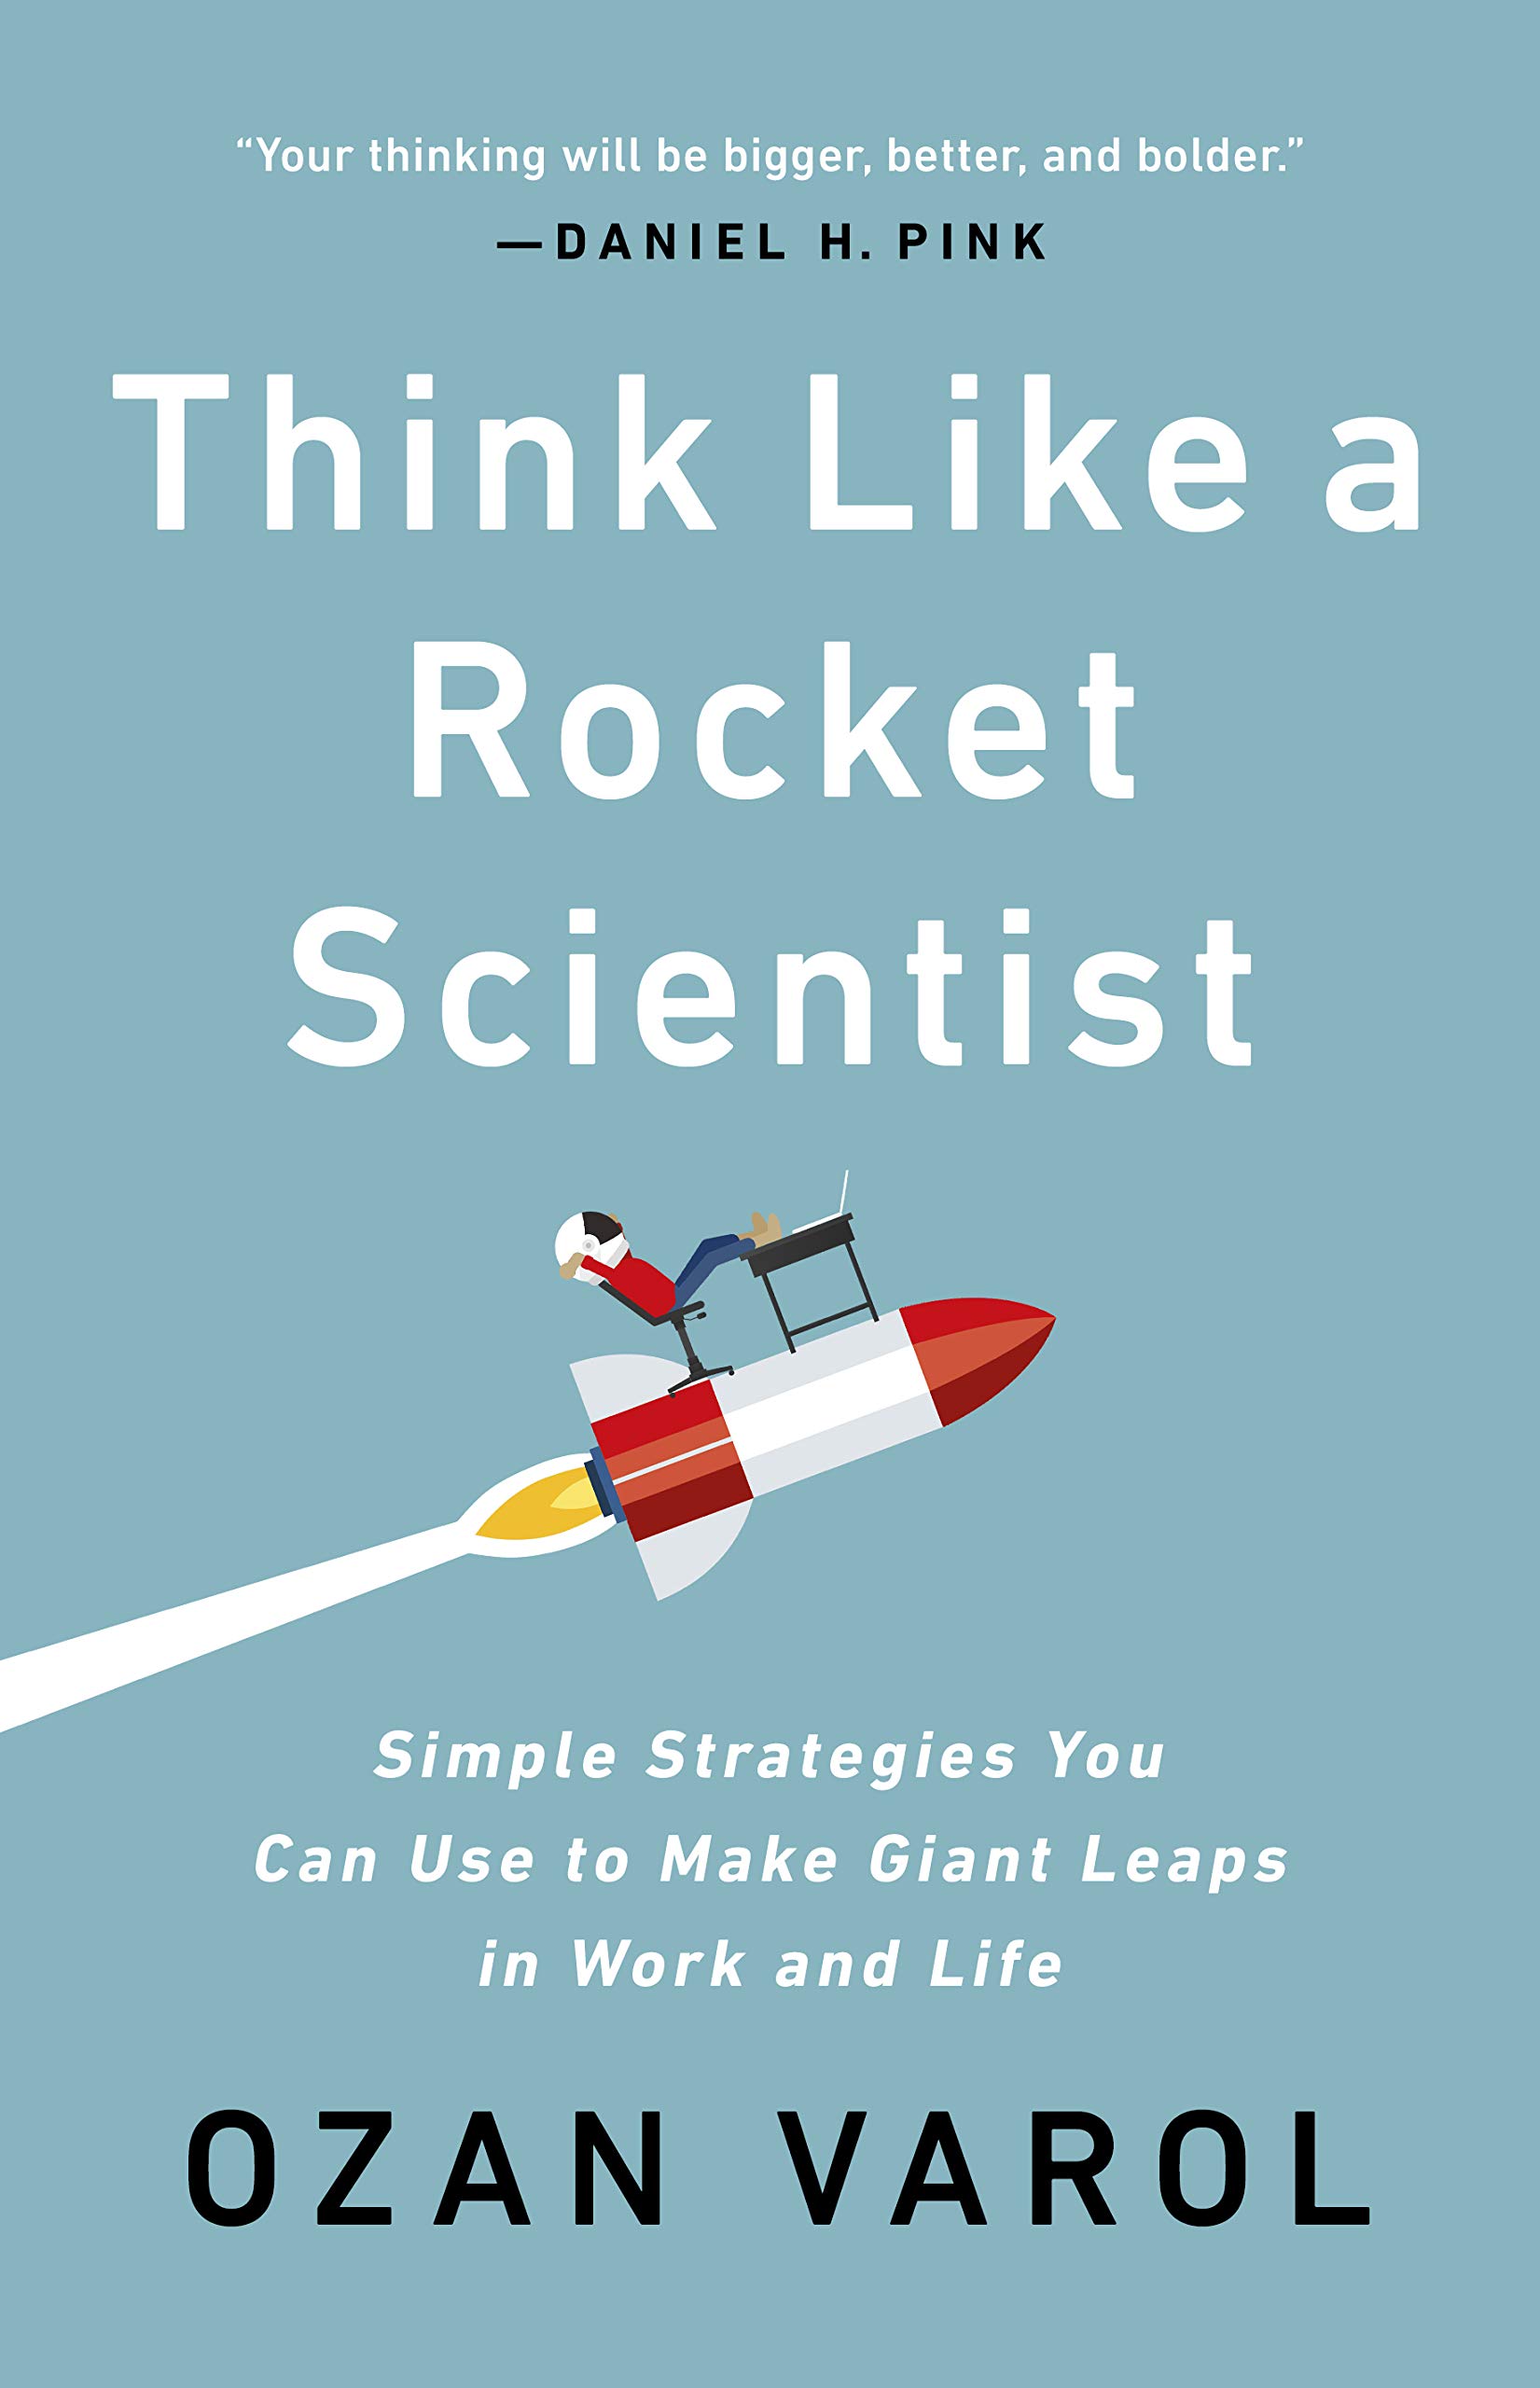 Cover Image of the Book Think Like a Rocket Scientist